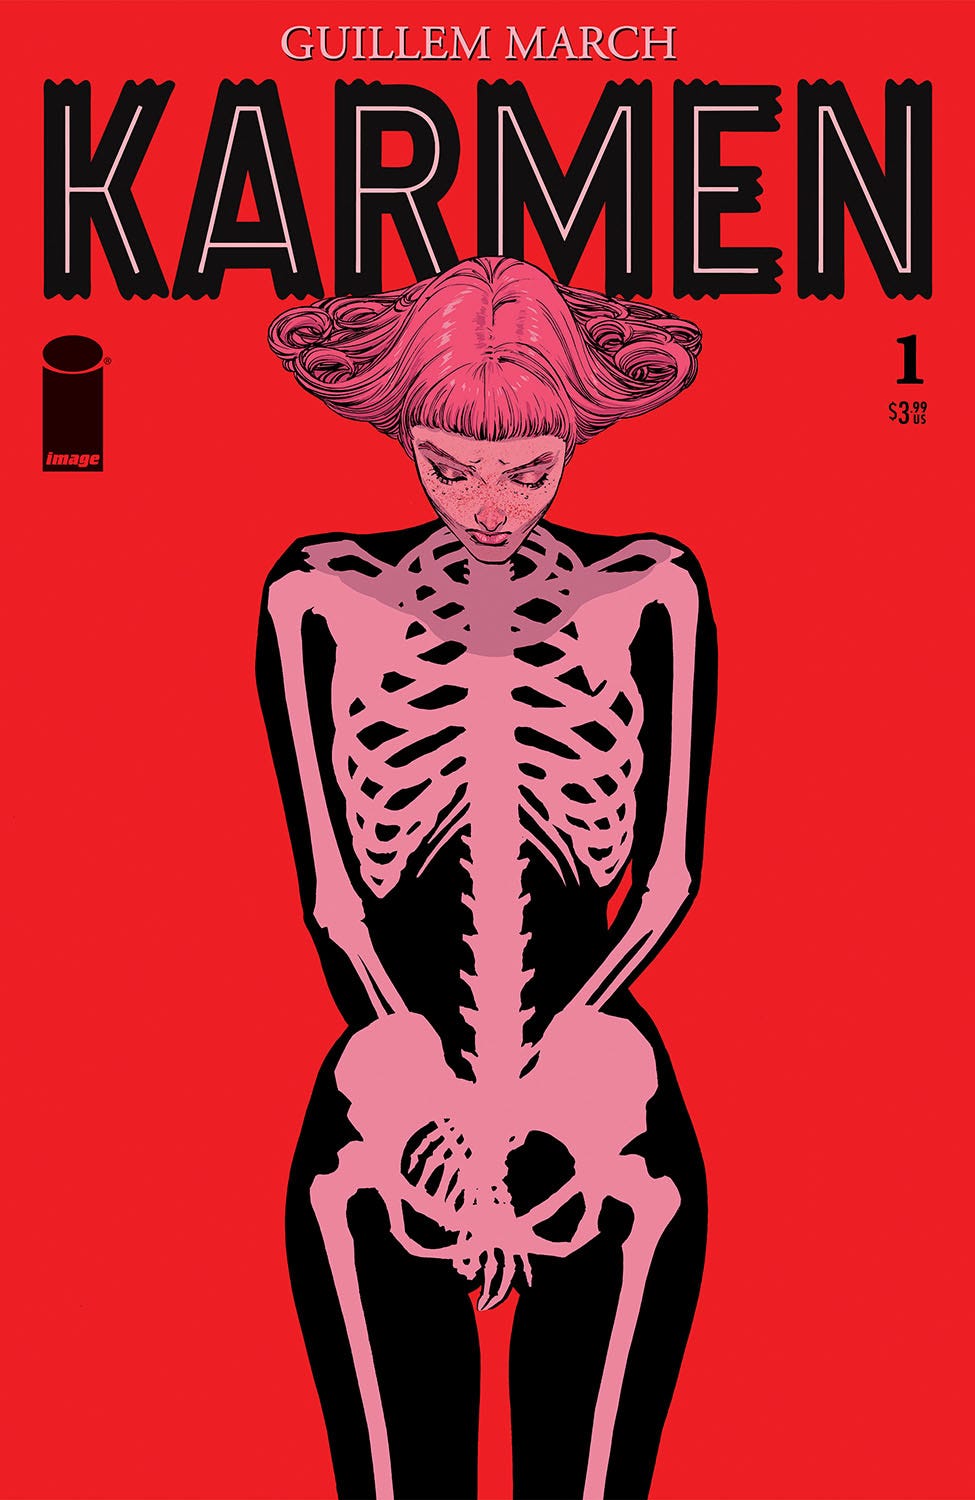 Karmen #1 (Cover A - March)